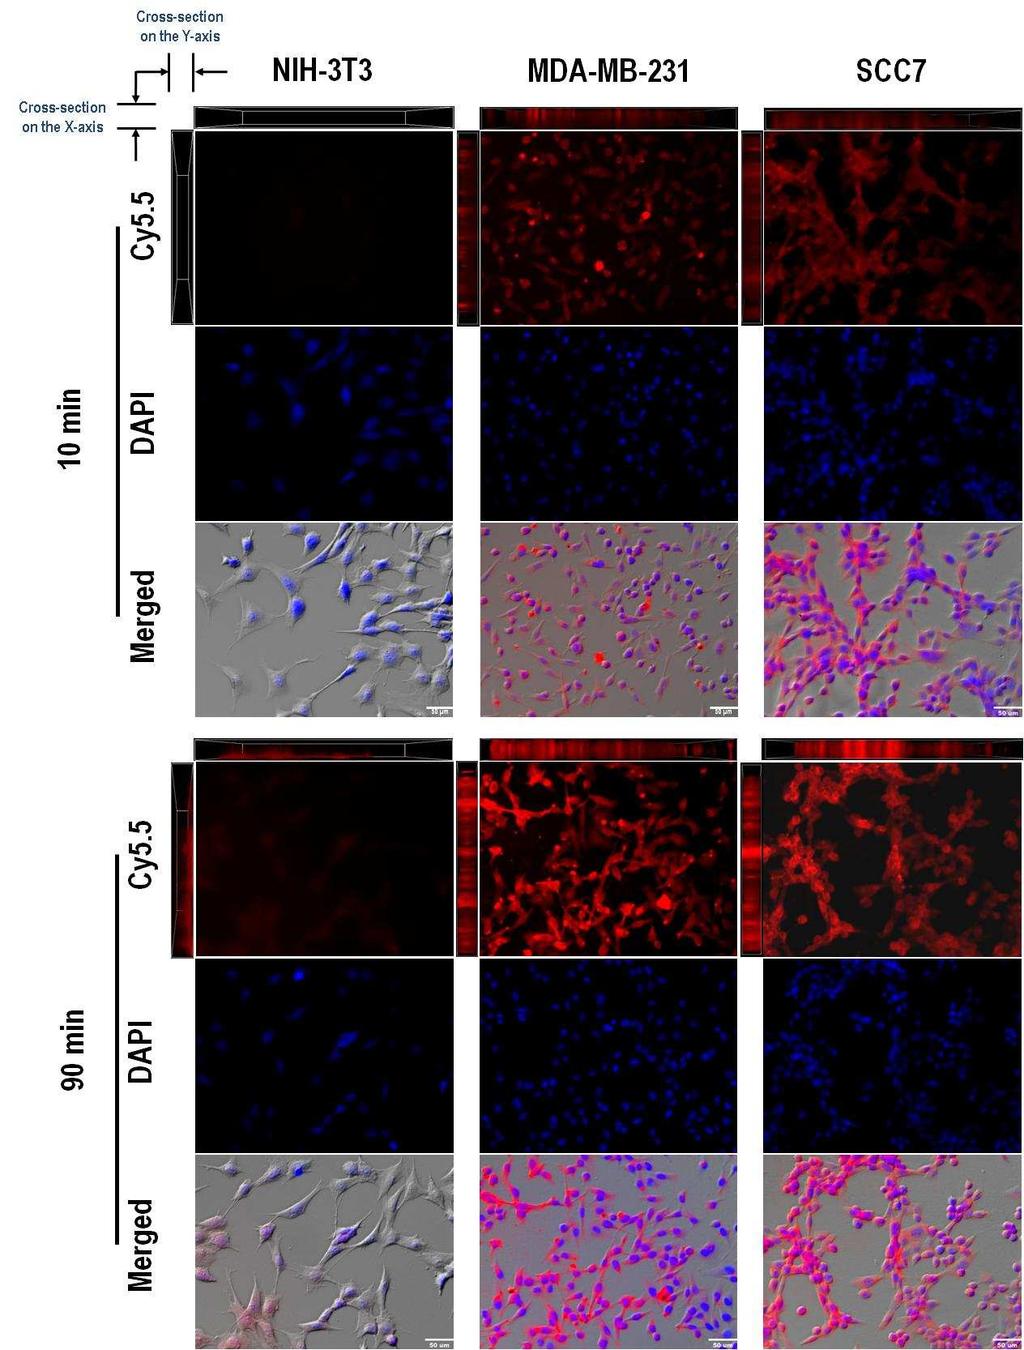 Figure S1. Cellular uptake behavior of Cy5.5-labeled P-HA-NPs in vitro. Confocal images of normal fibroblast cells (NIH-3T3) and cancer cells (MDA-MB-231 and SCC7) incubated with Cy5.